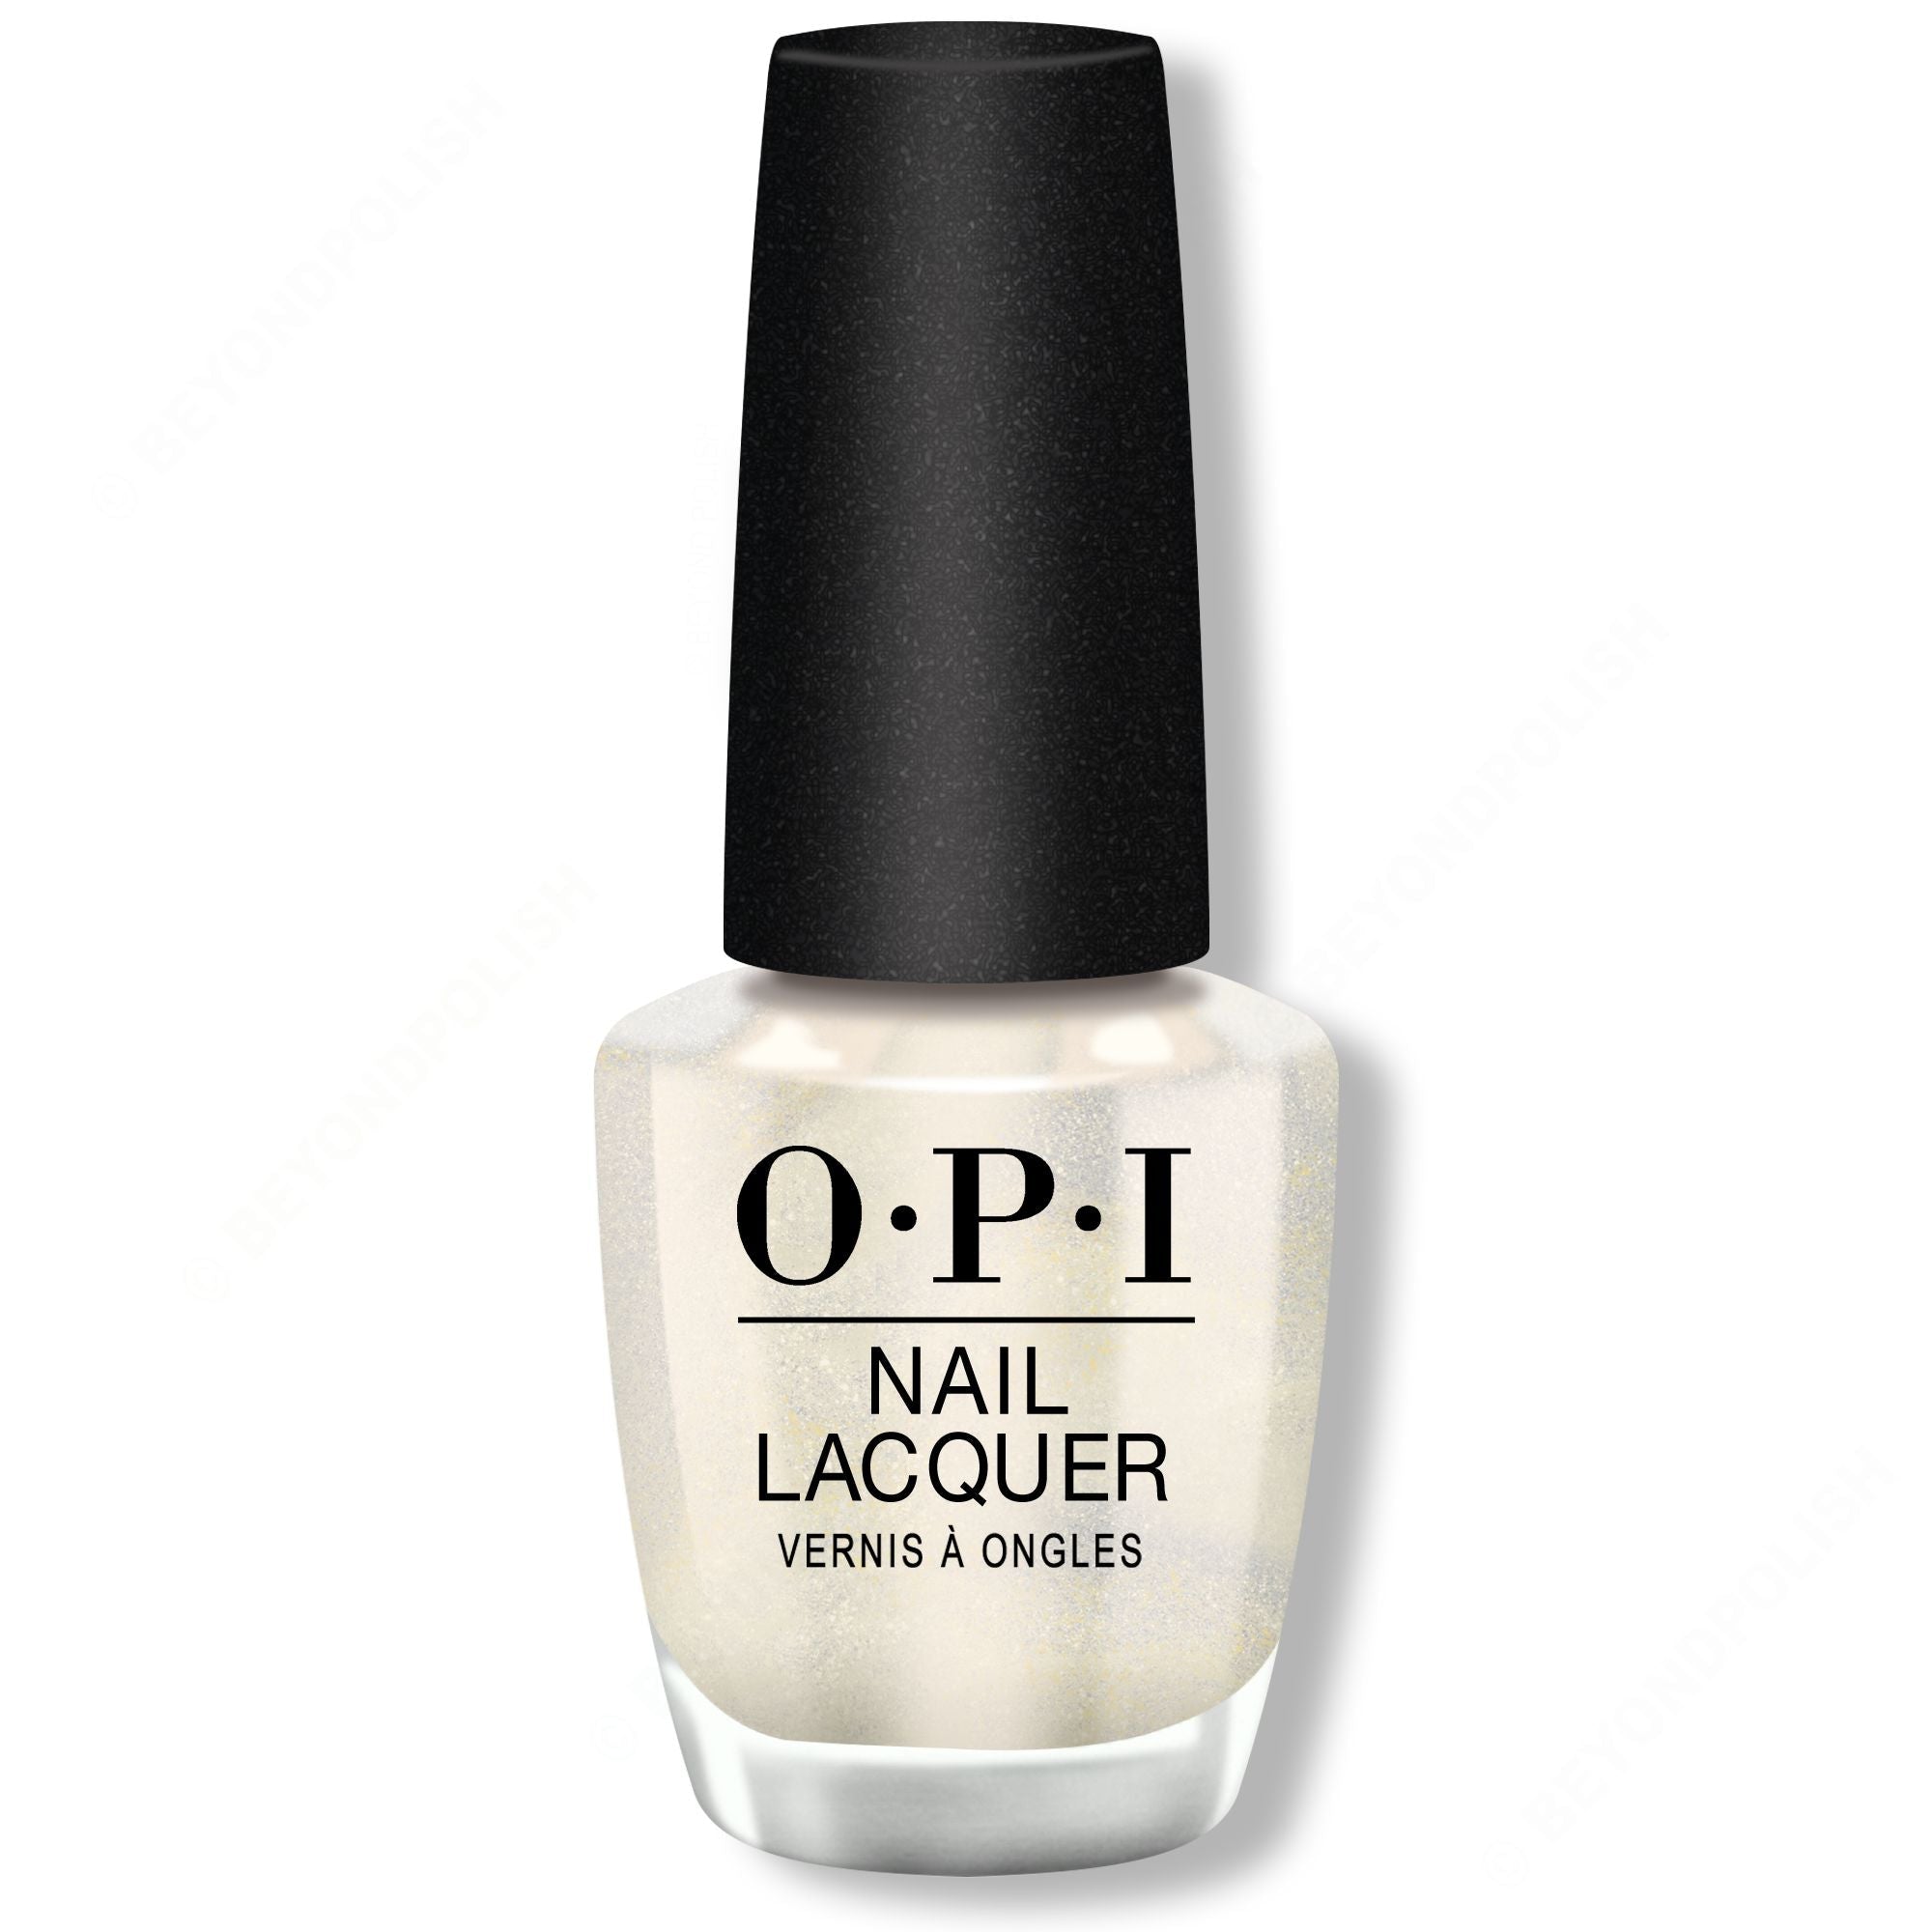 OPI Nail Lacquer - Snow Holding Back 0.5 oz - #HRP10